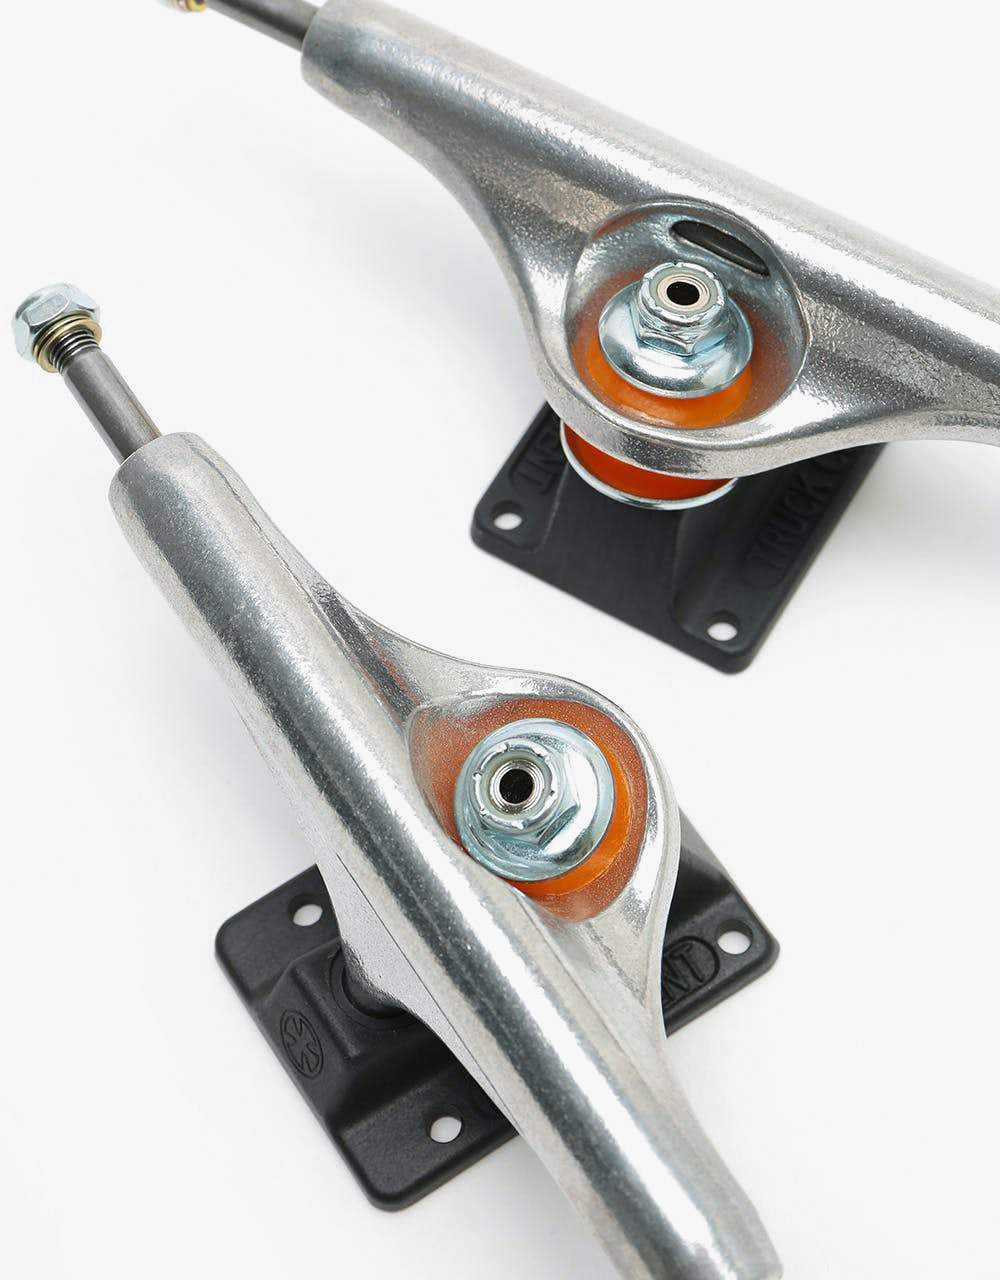 Independent Stage 11 Hollow Forged 159 Standard Skateboard Trucks (Pair)